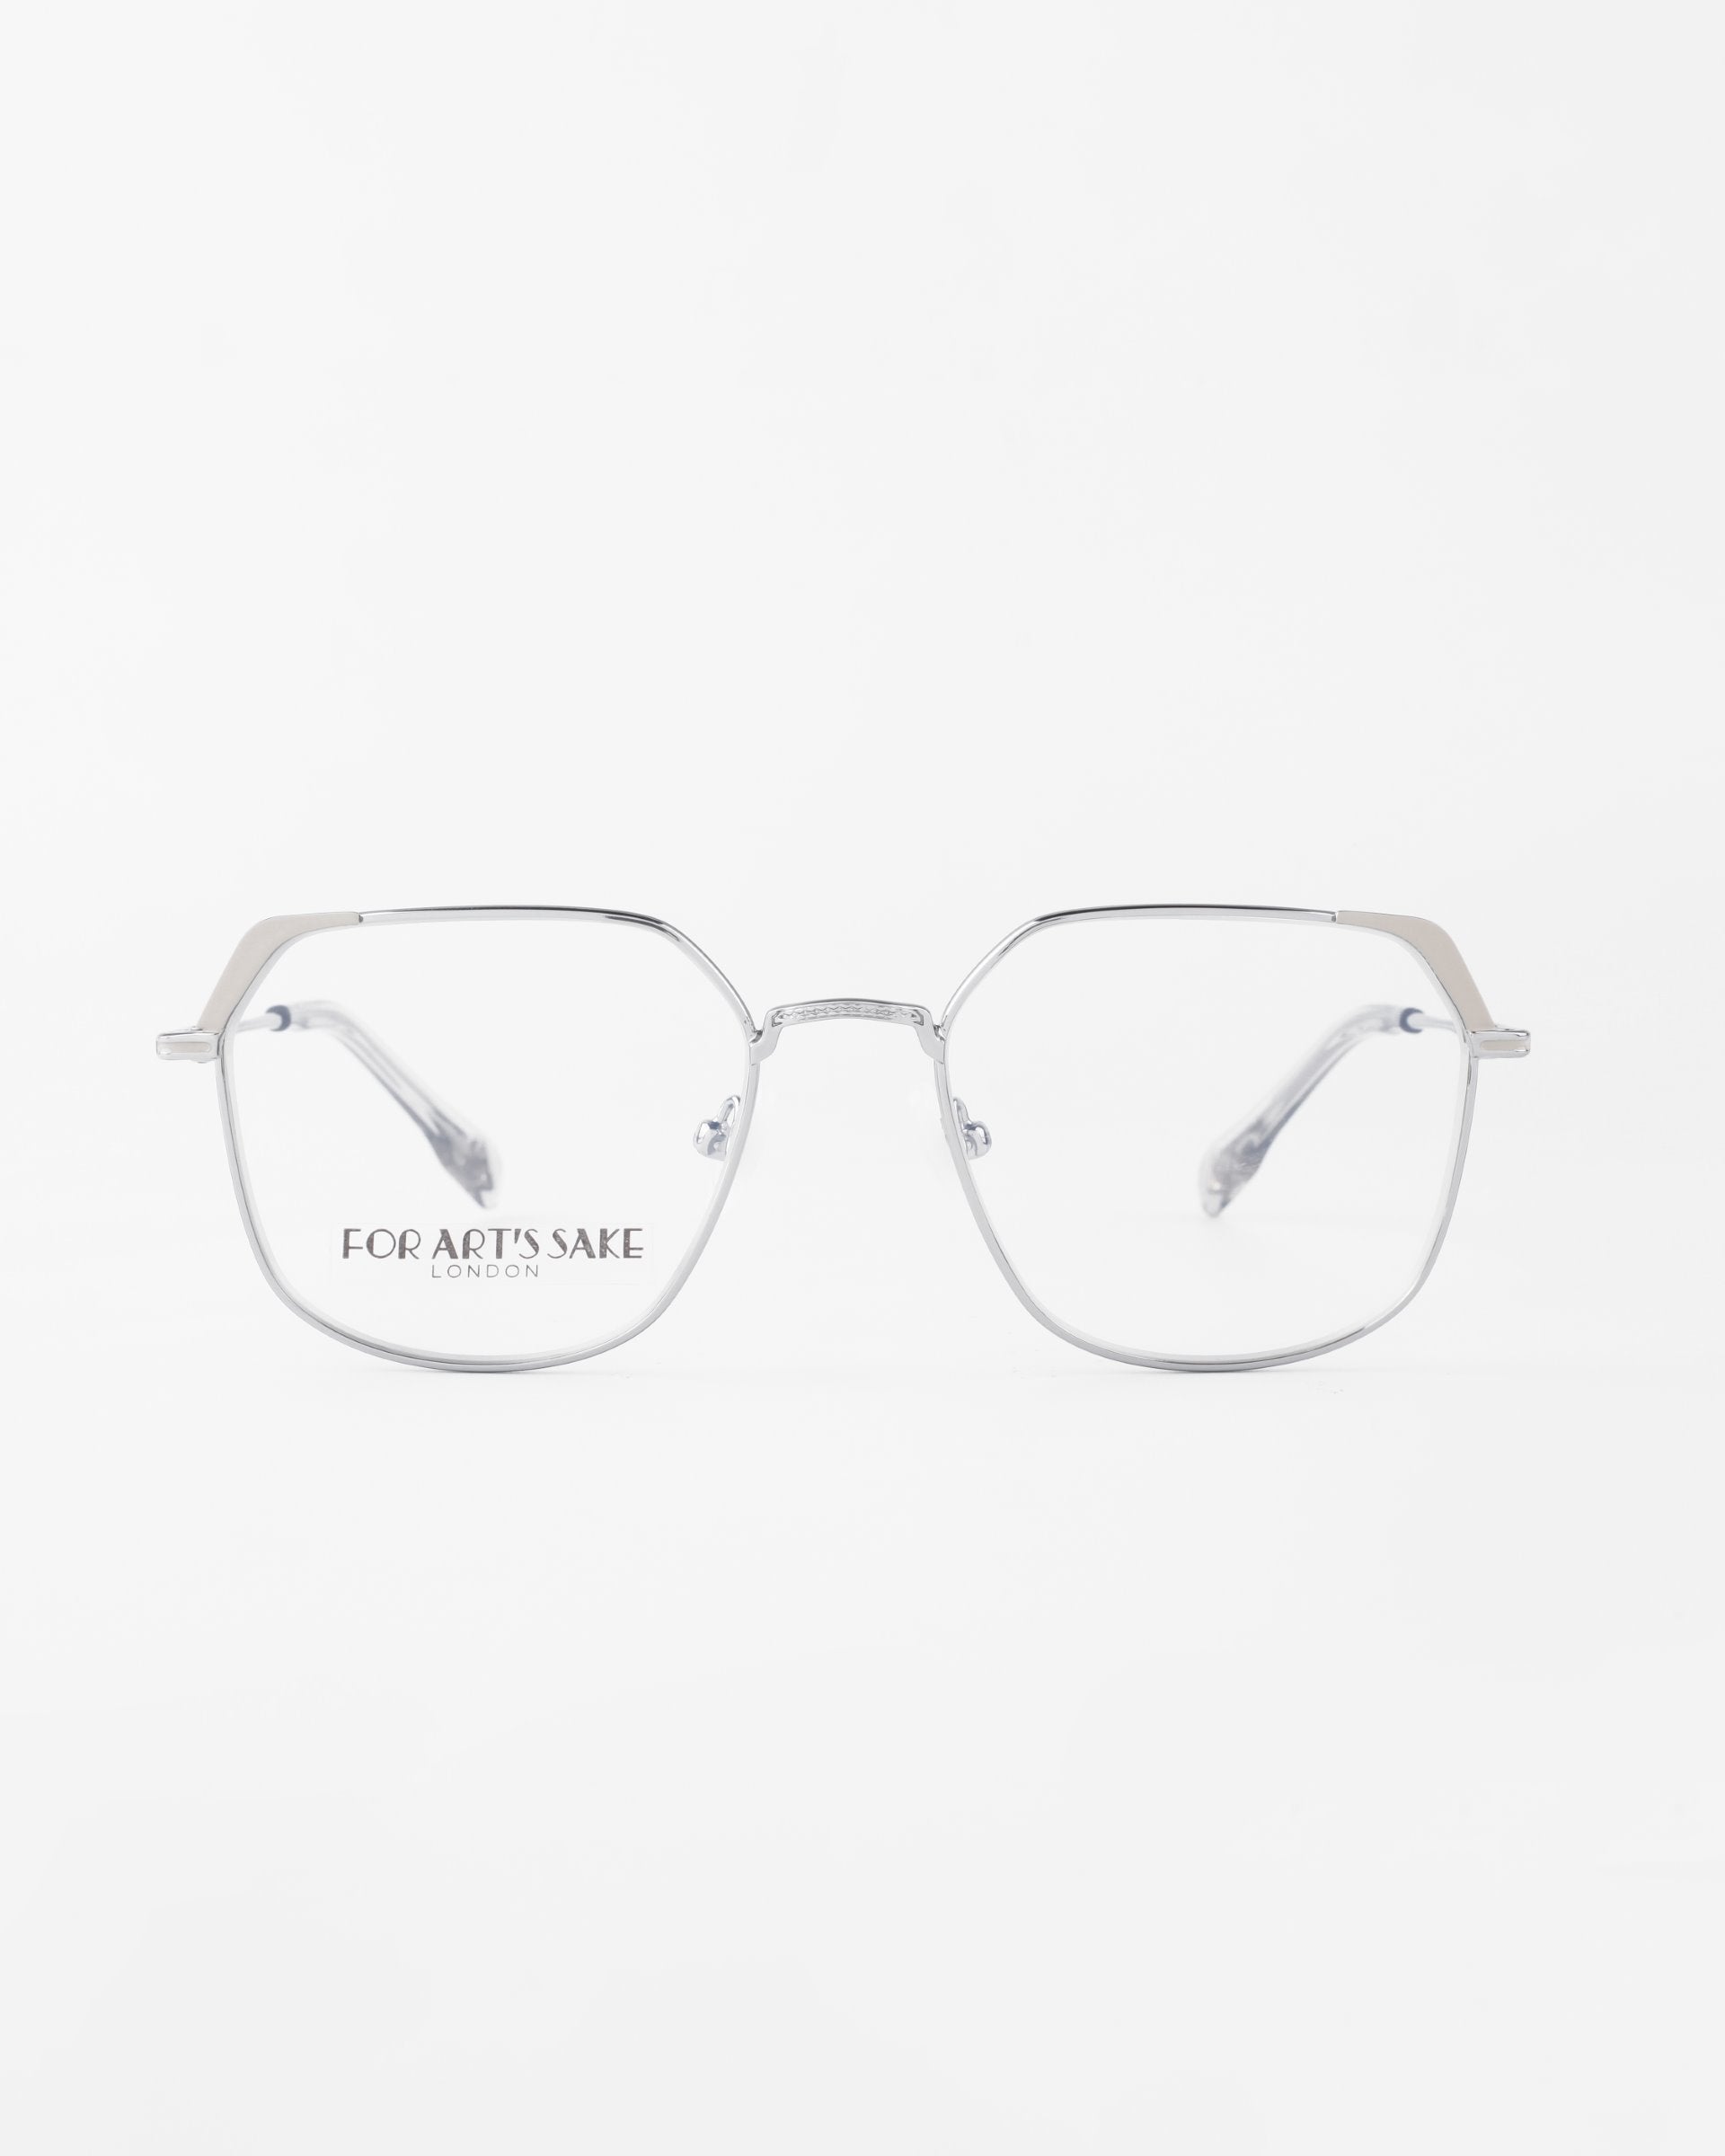 A pair of Godiva eyeglasses from For Art's Sake®, with a geometric design, featuring thin, angular metal temples and clear lenses with blue light filter. The phrase "FOR ART'S SAKE LONDON" is printed on the left lens. The glasses are displayed against a white background.